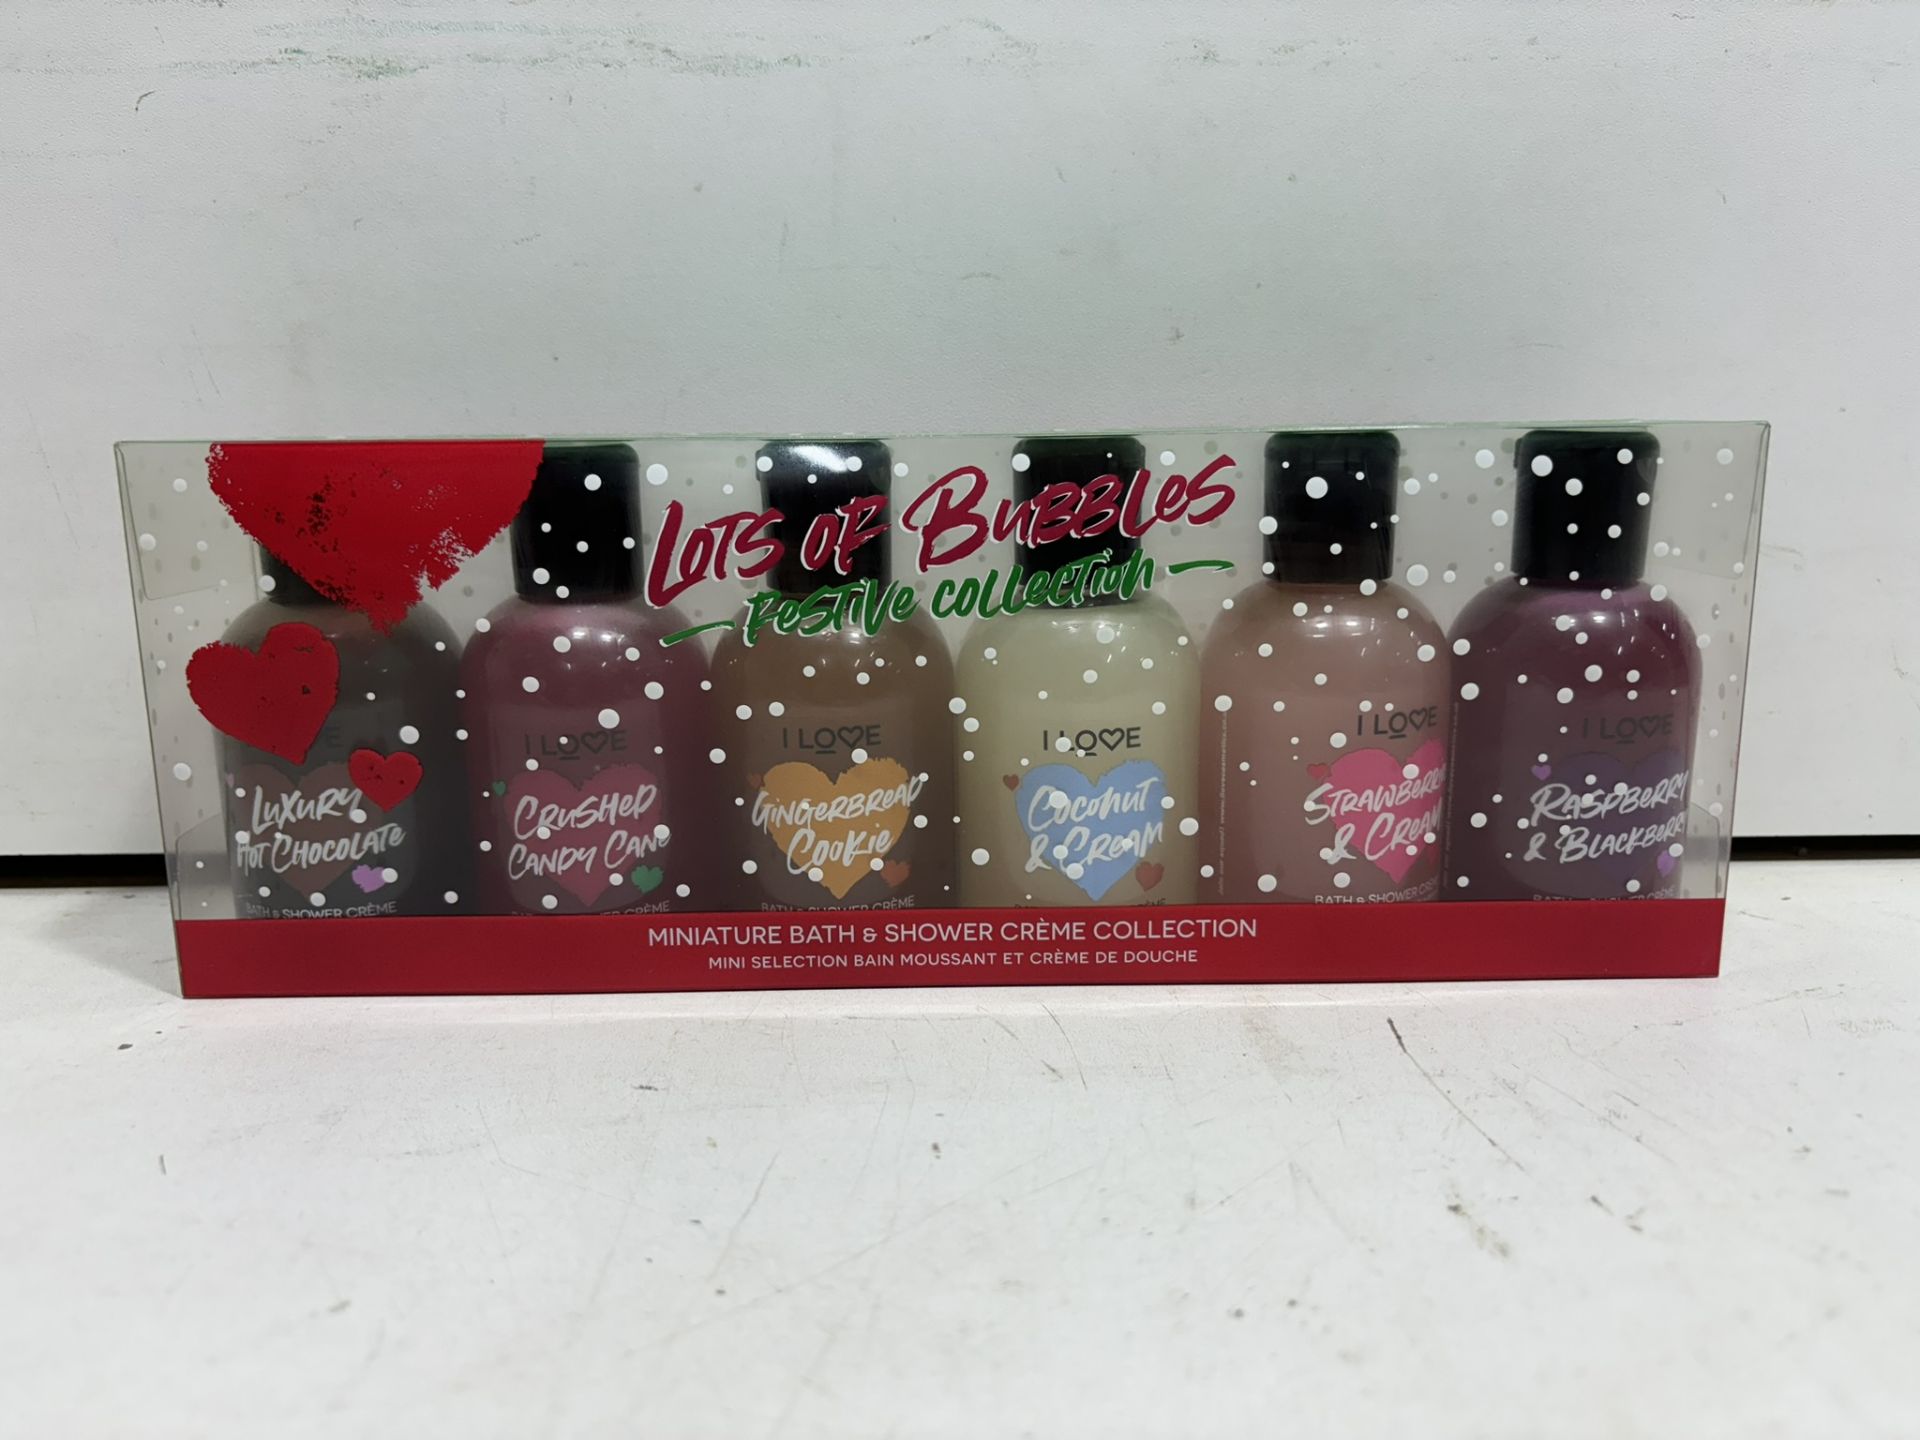 12 x I Love Cosmetics Lots of Bubbles Bath & Shower Creme Festive Collection Gift Sets